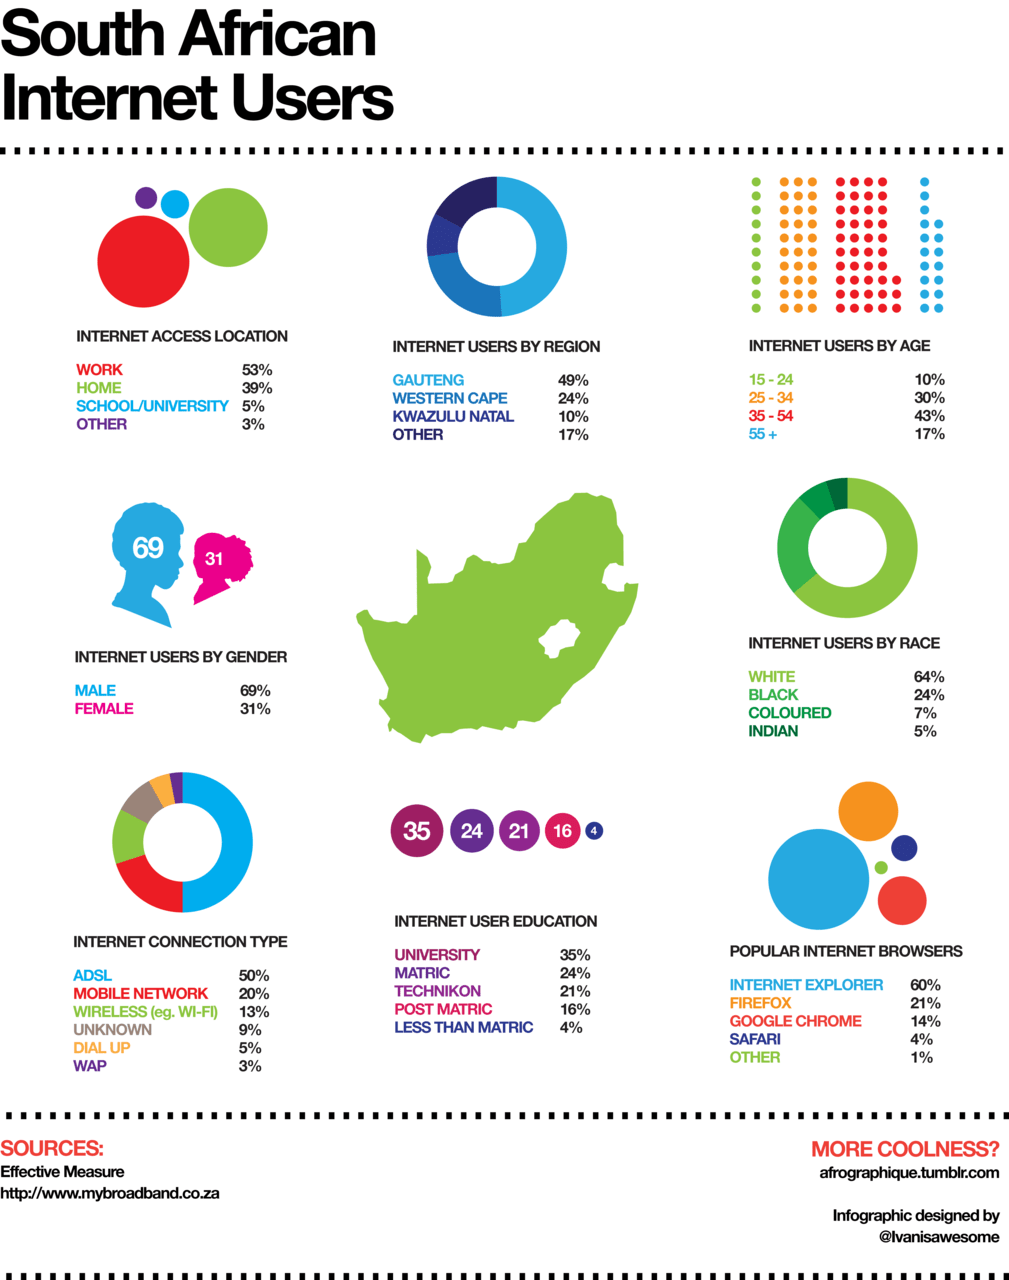 South African mobile and data internet users